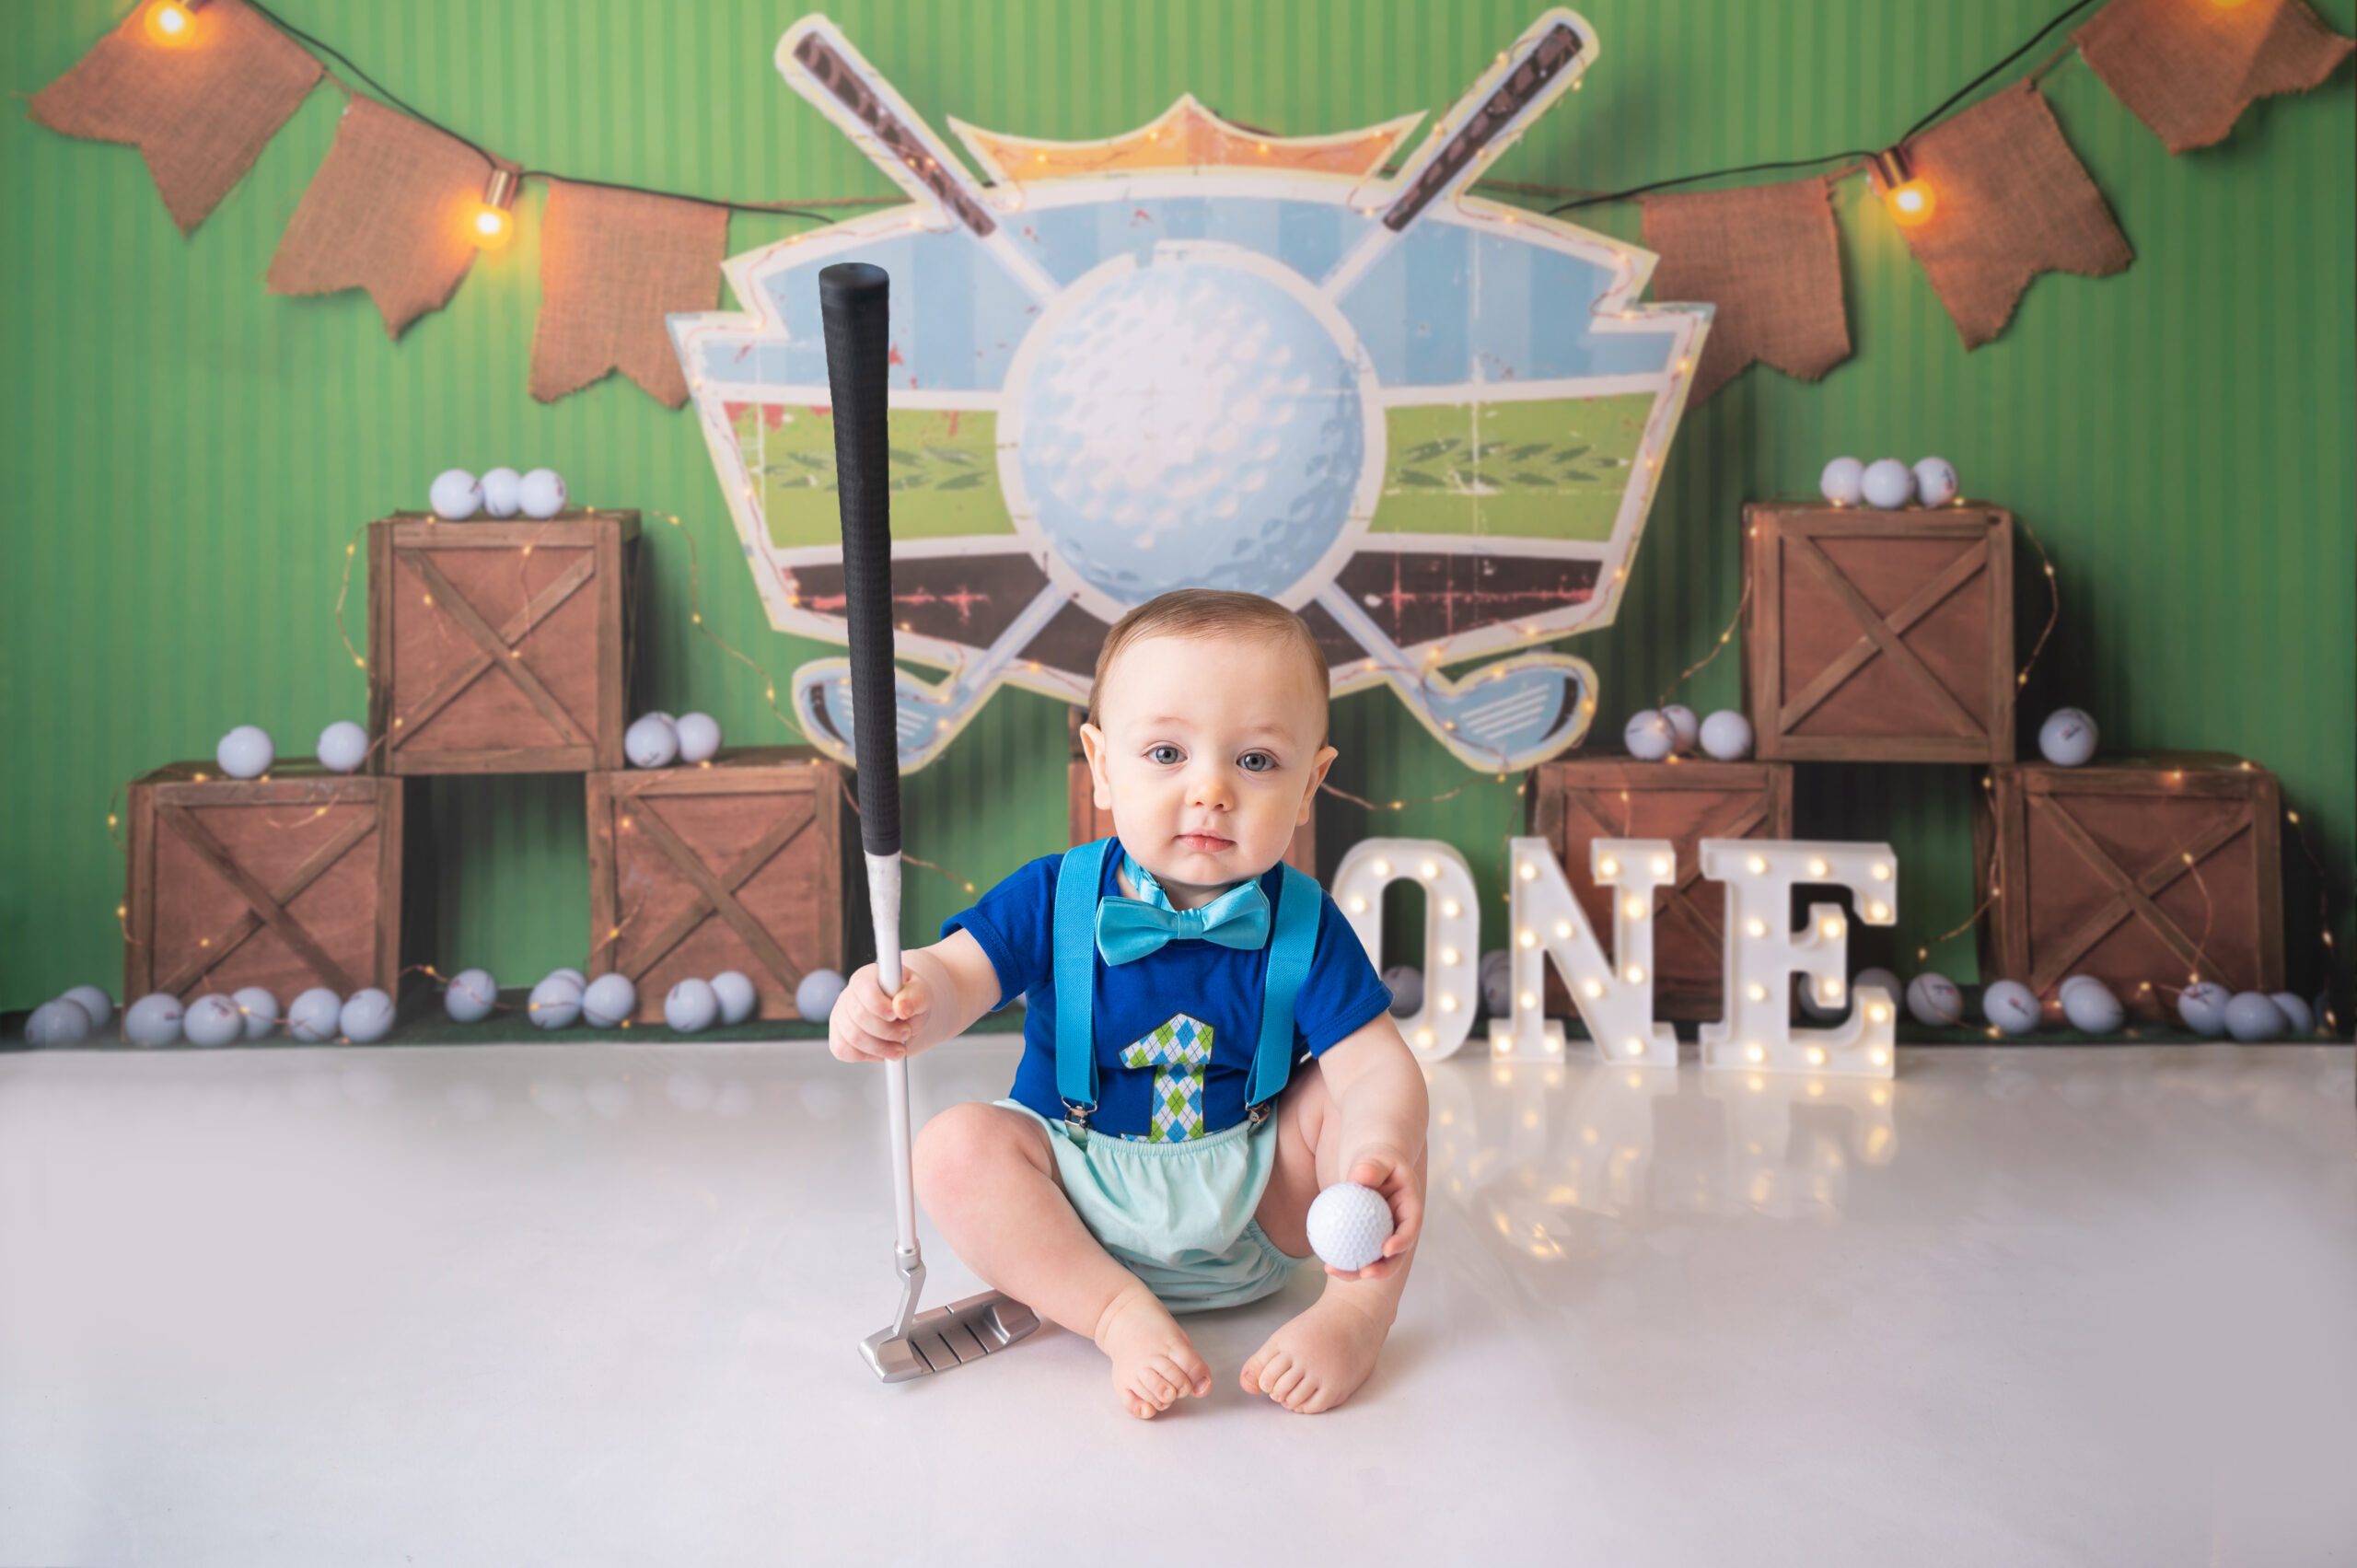 one year old dressed in golf attire celebrating his first birthday